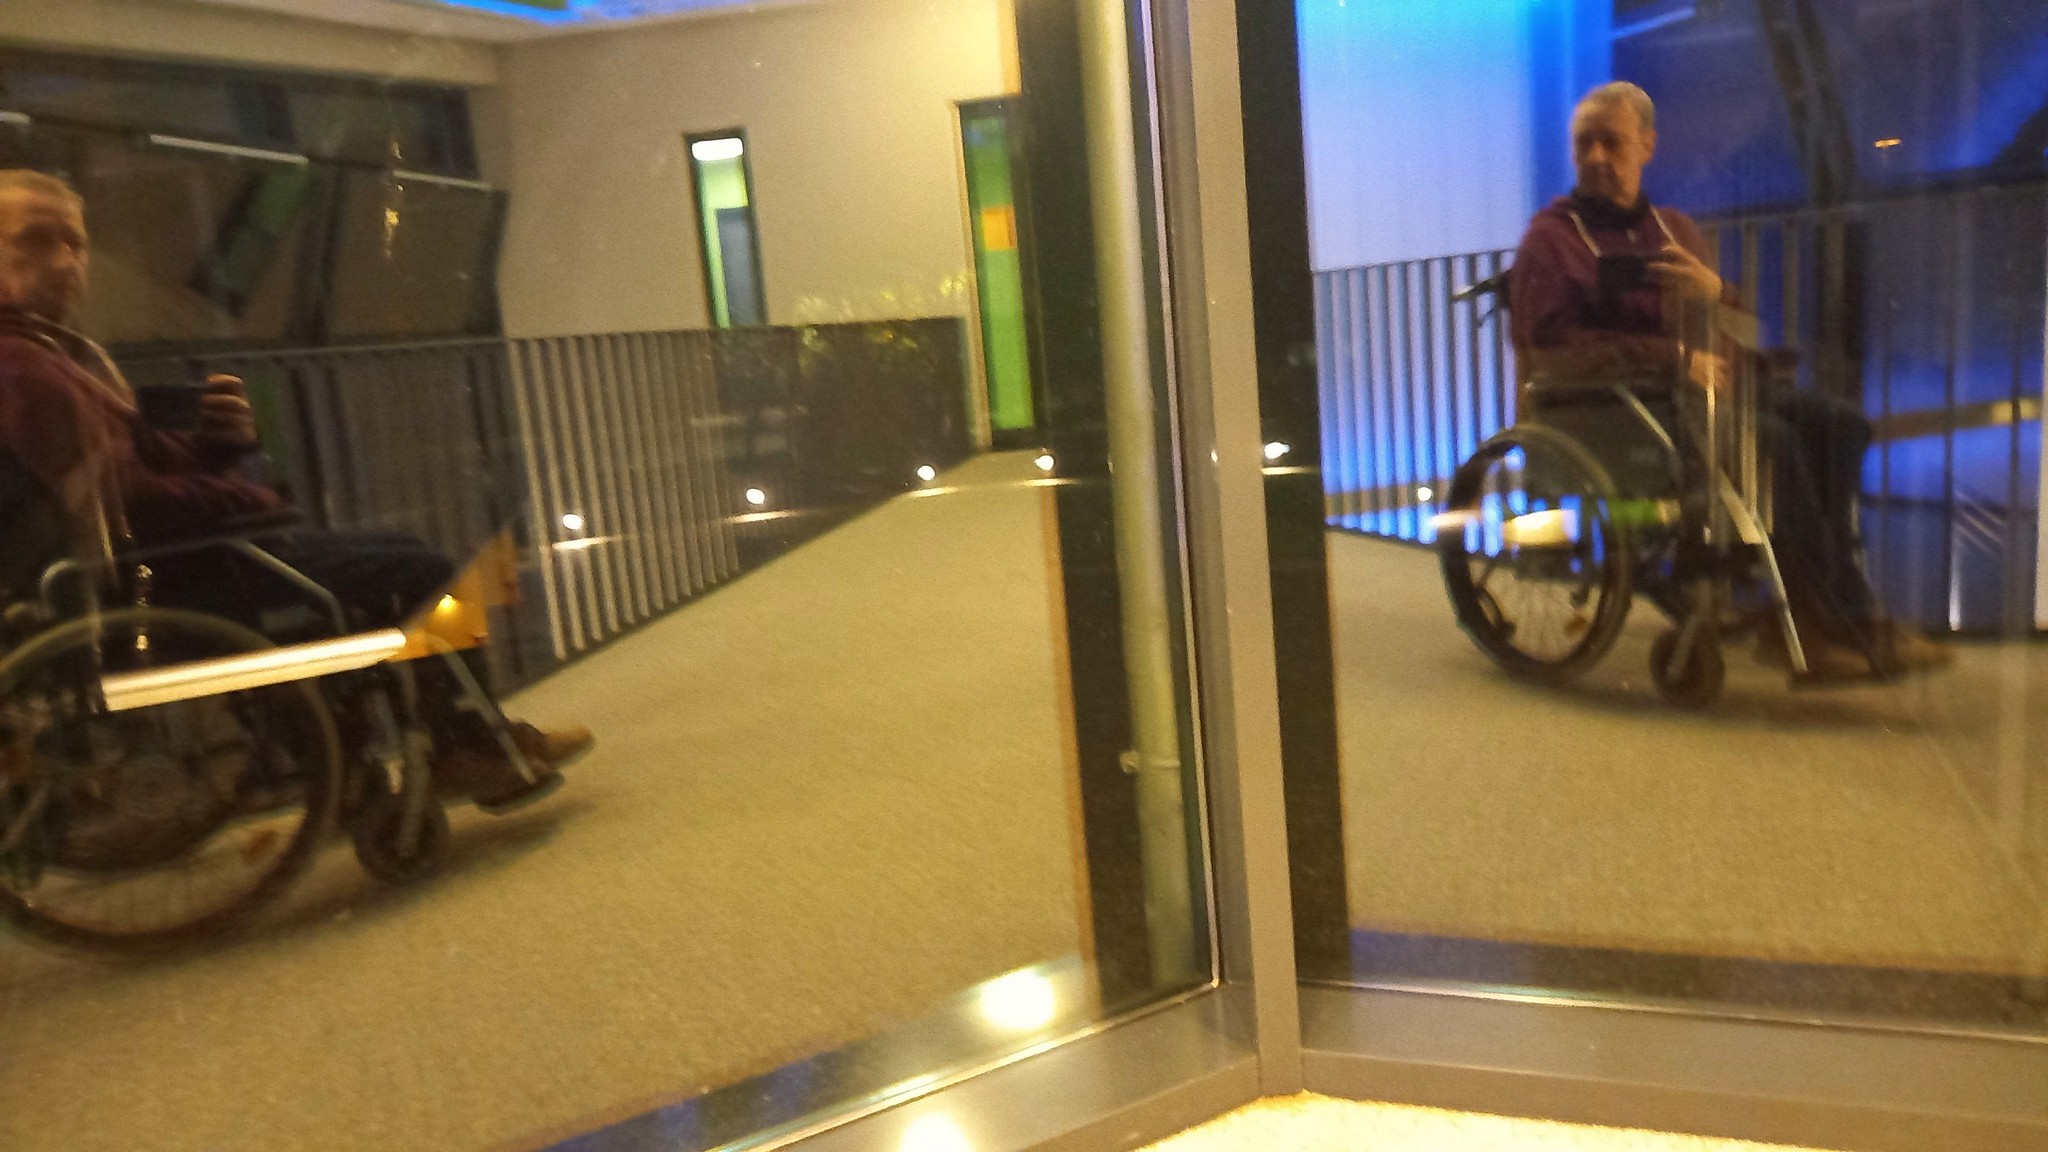 Photo of an older man's reflection as he sits in a wheelchair.